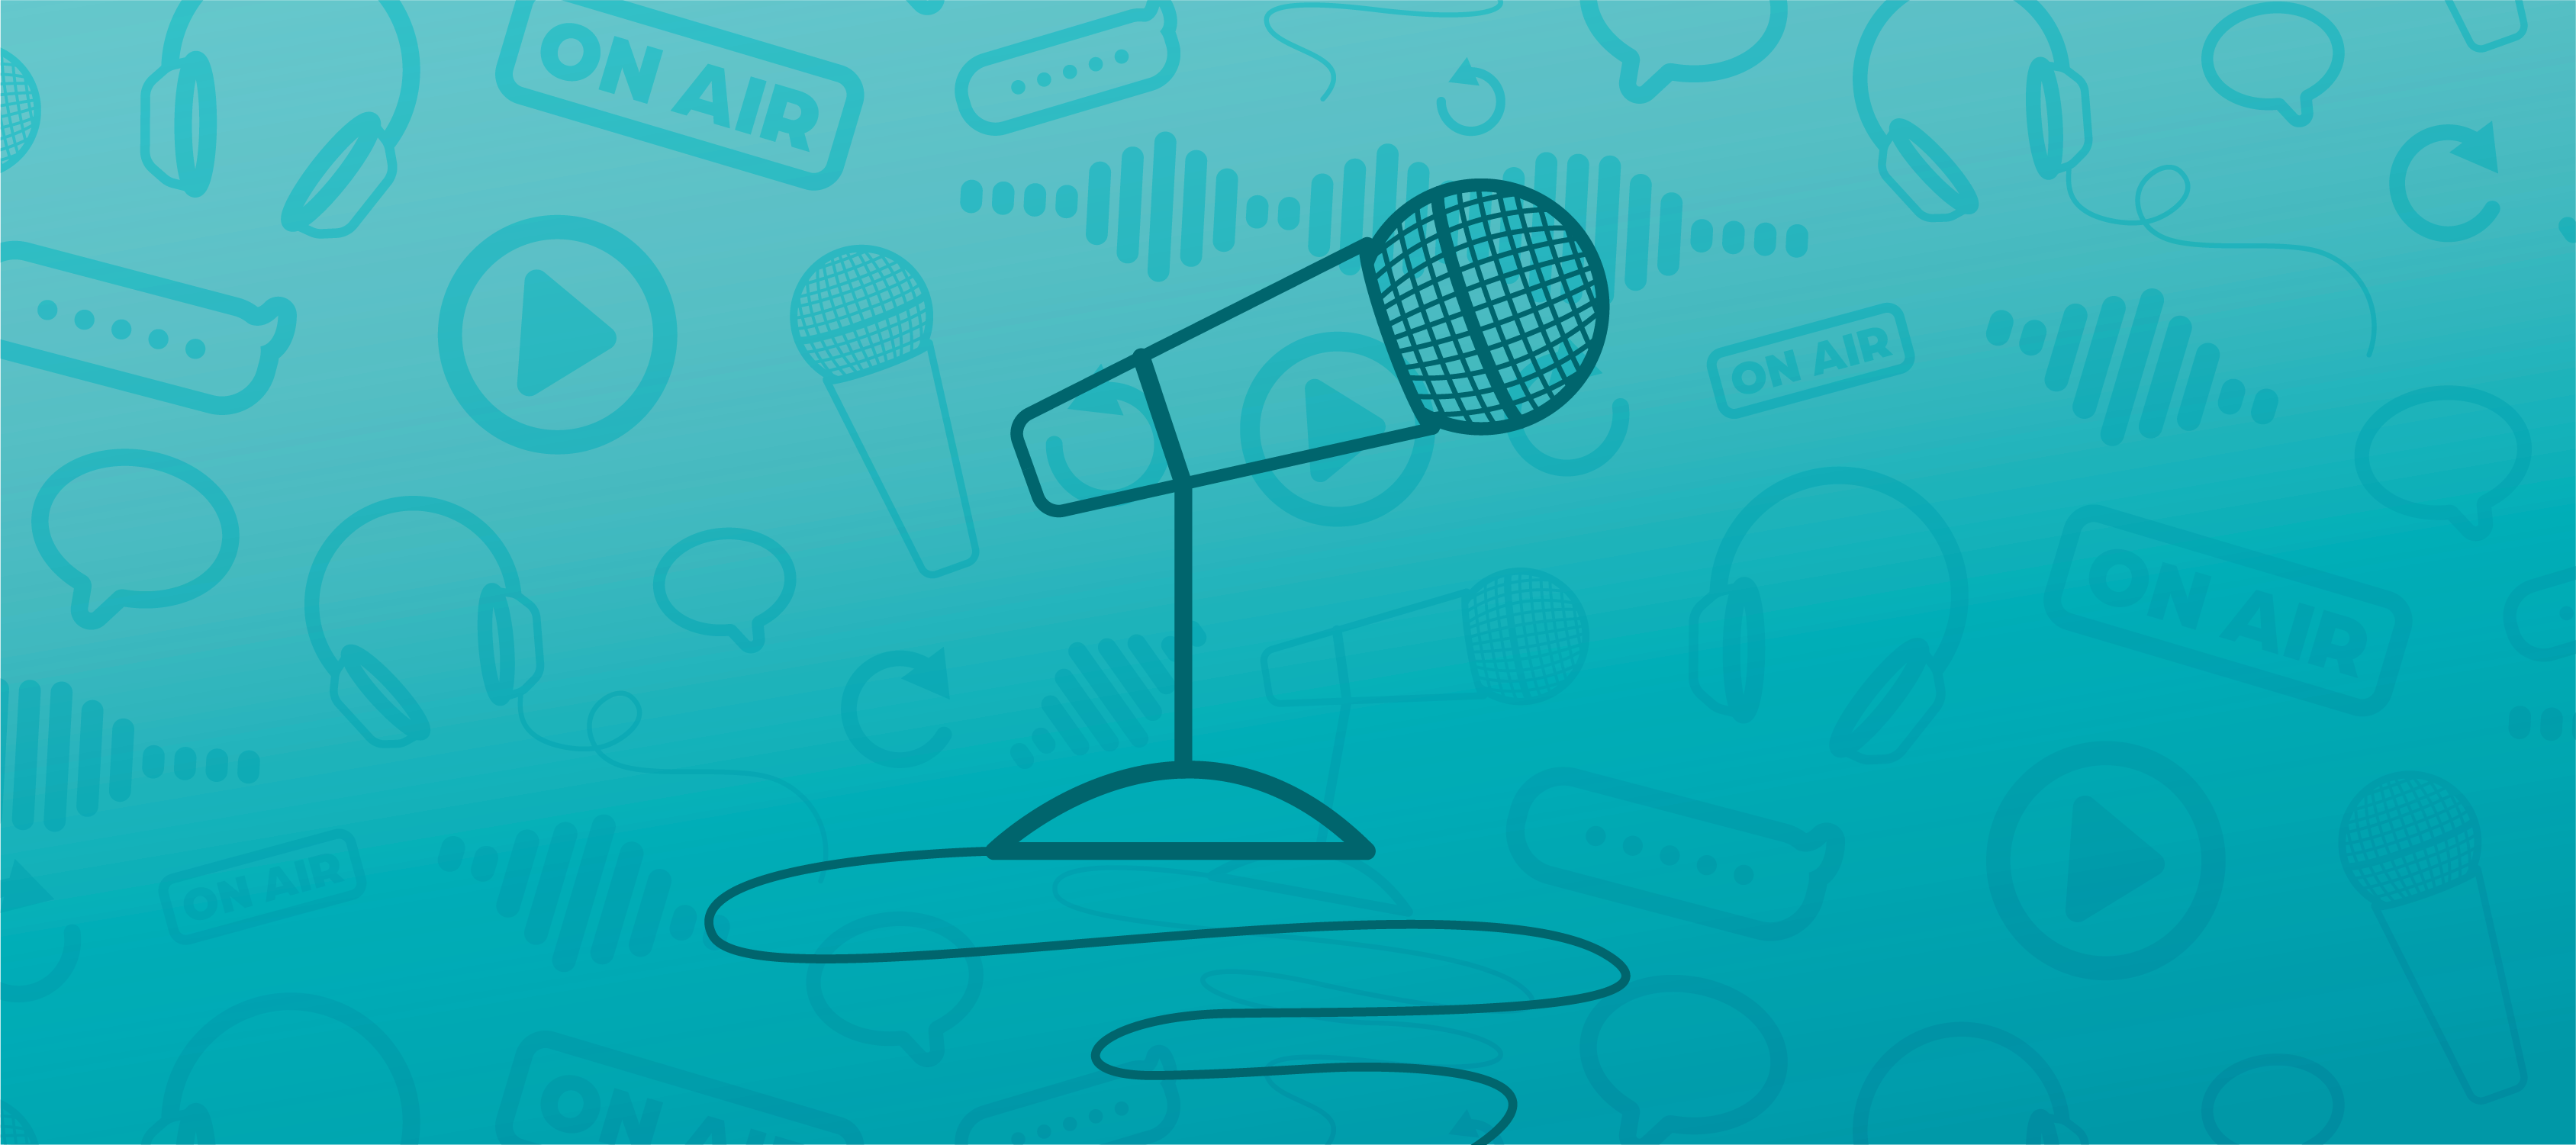 A blue header image featuring an icon of a microphone in the center and faded podcasting icons in the background